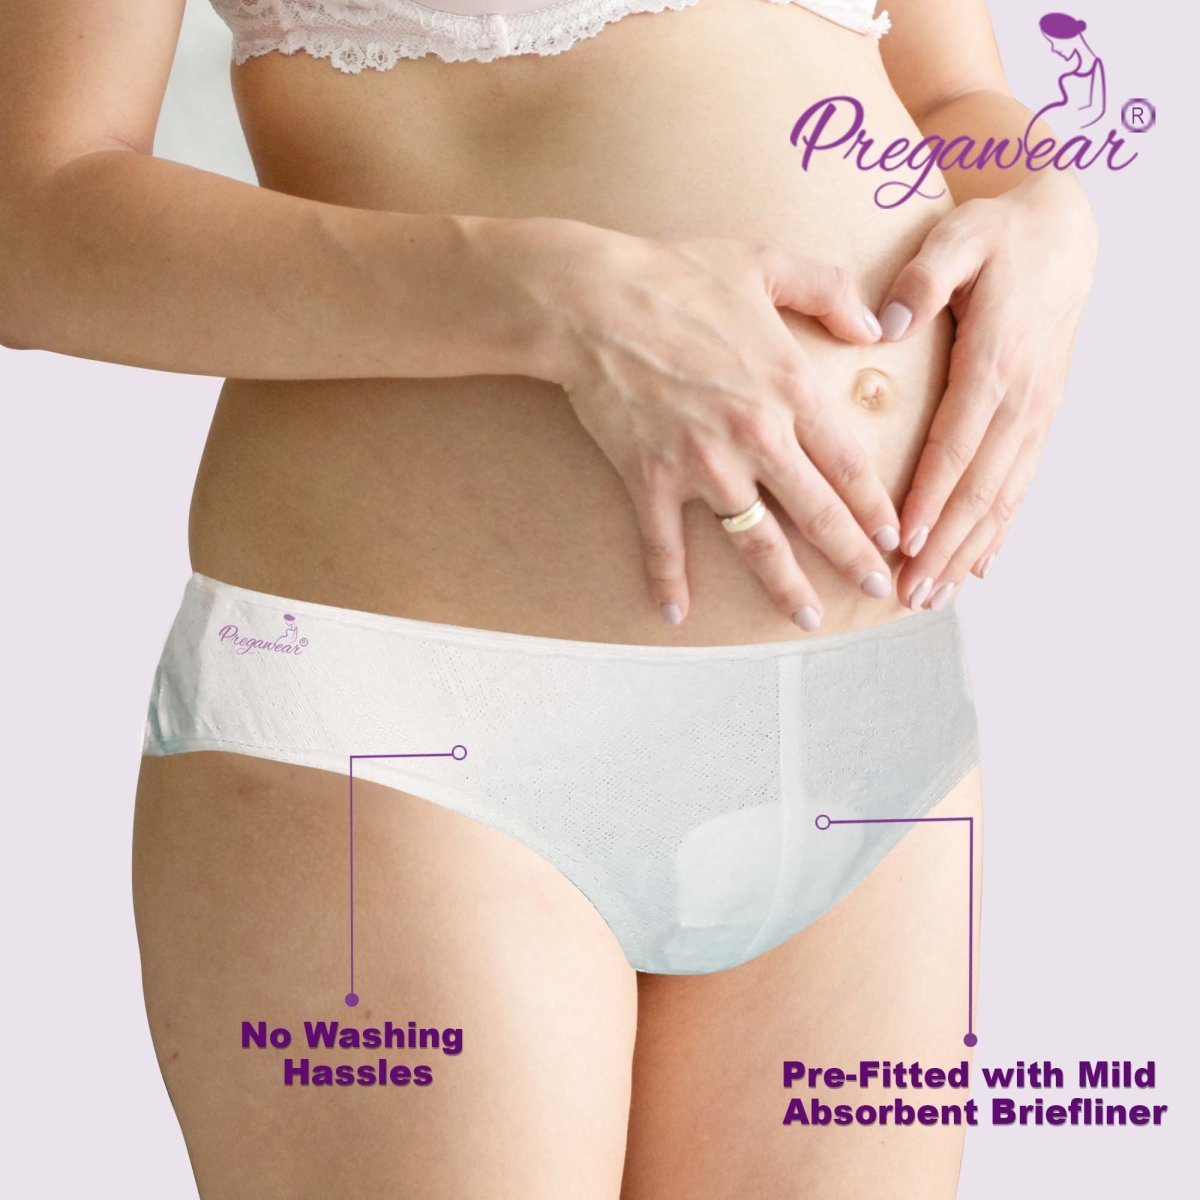 Pregawear Disposable Prepartum Pregnancy Panty for Minor Discharge (Pack of 5) - PF004A-0XS